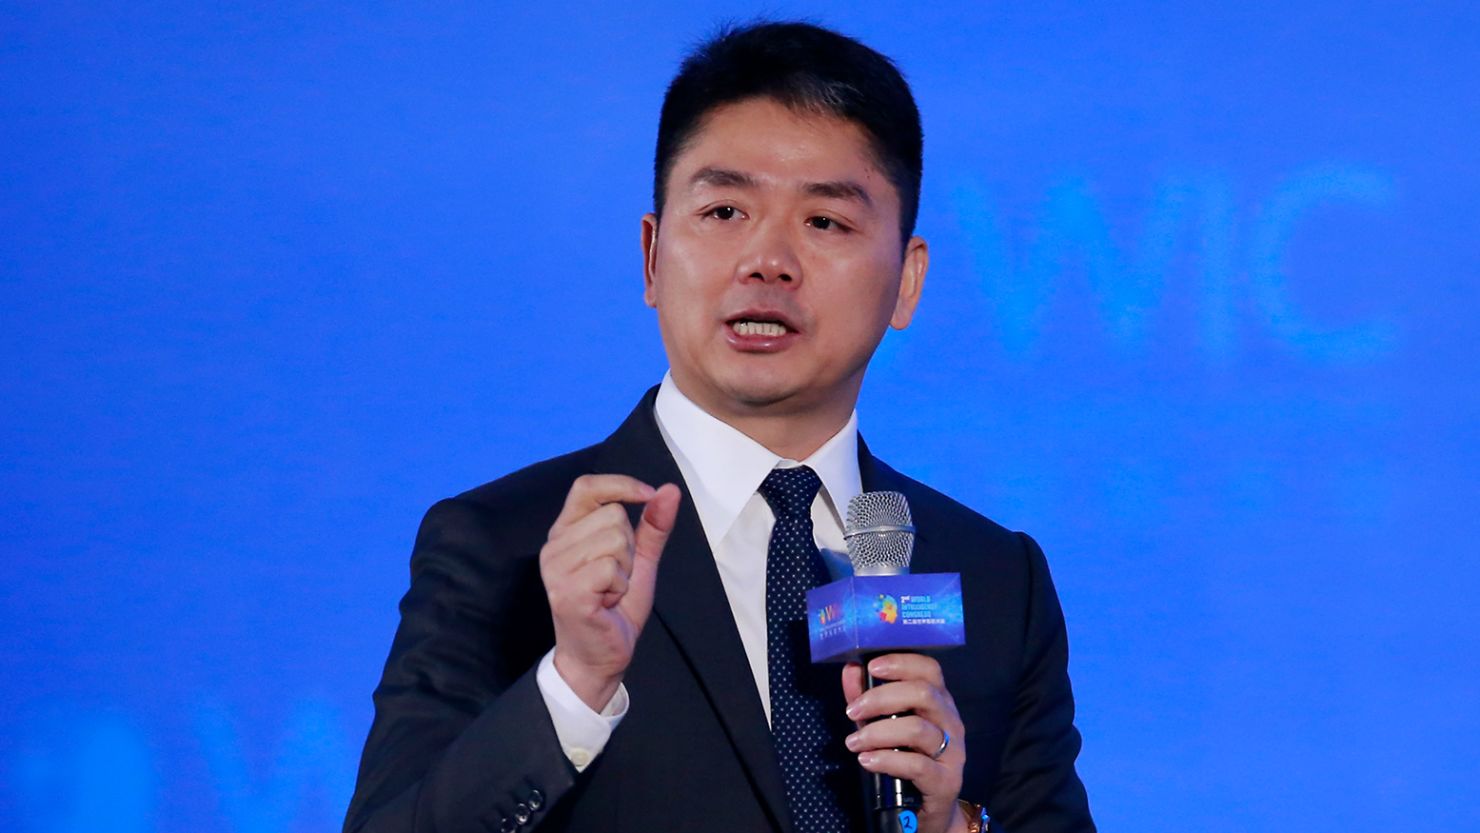 CEO of JD.com Richard Liu Qiangdong delivers a speech during the 2nd World Intelligence Congress (WIC 2018) at Tianjin Meijiang Convention and Exhibition Center on May 16, 2018 in Tianjin, China.